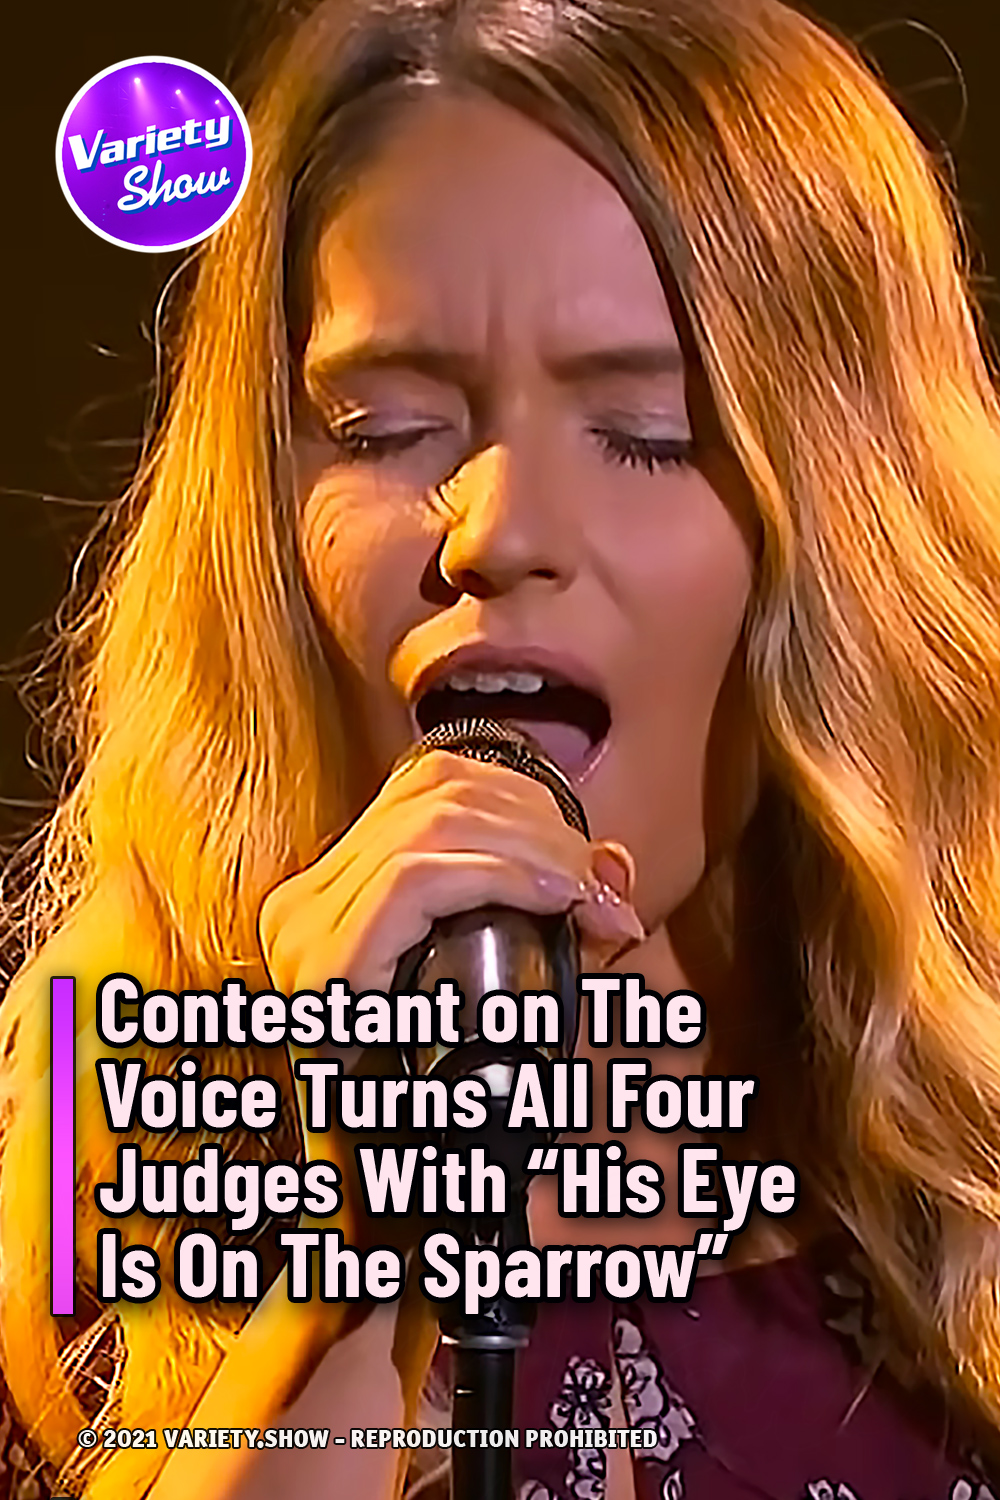 Contestant on The Voice Turns All Four Judges With “His Eye Is On The Sparrow”